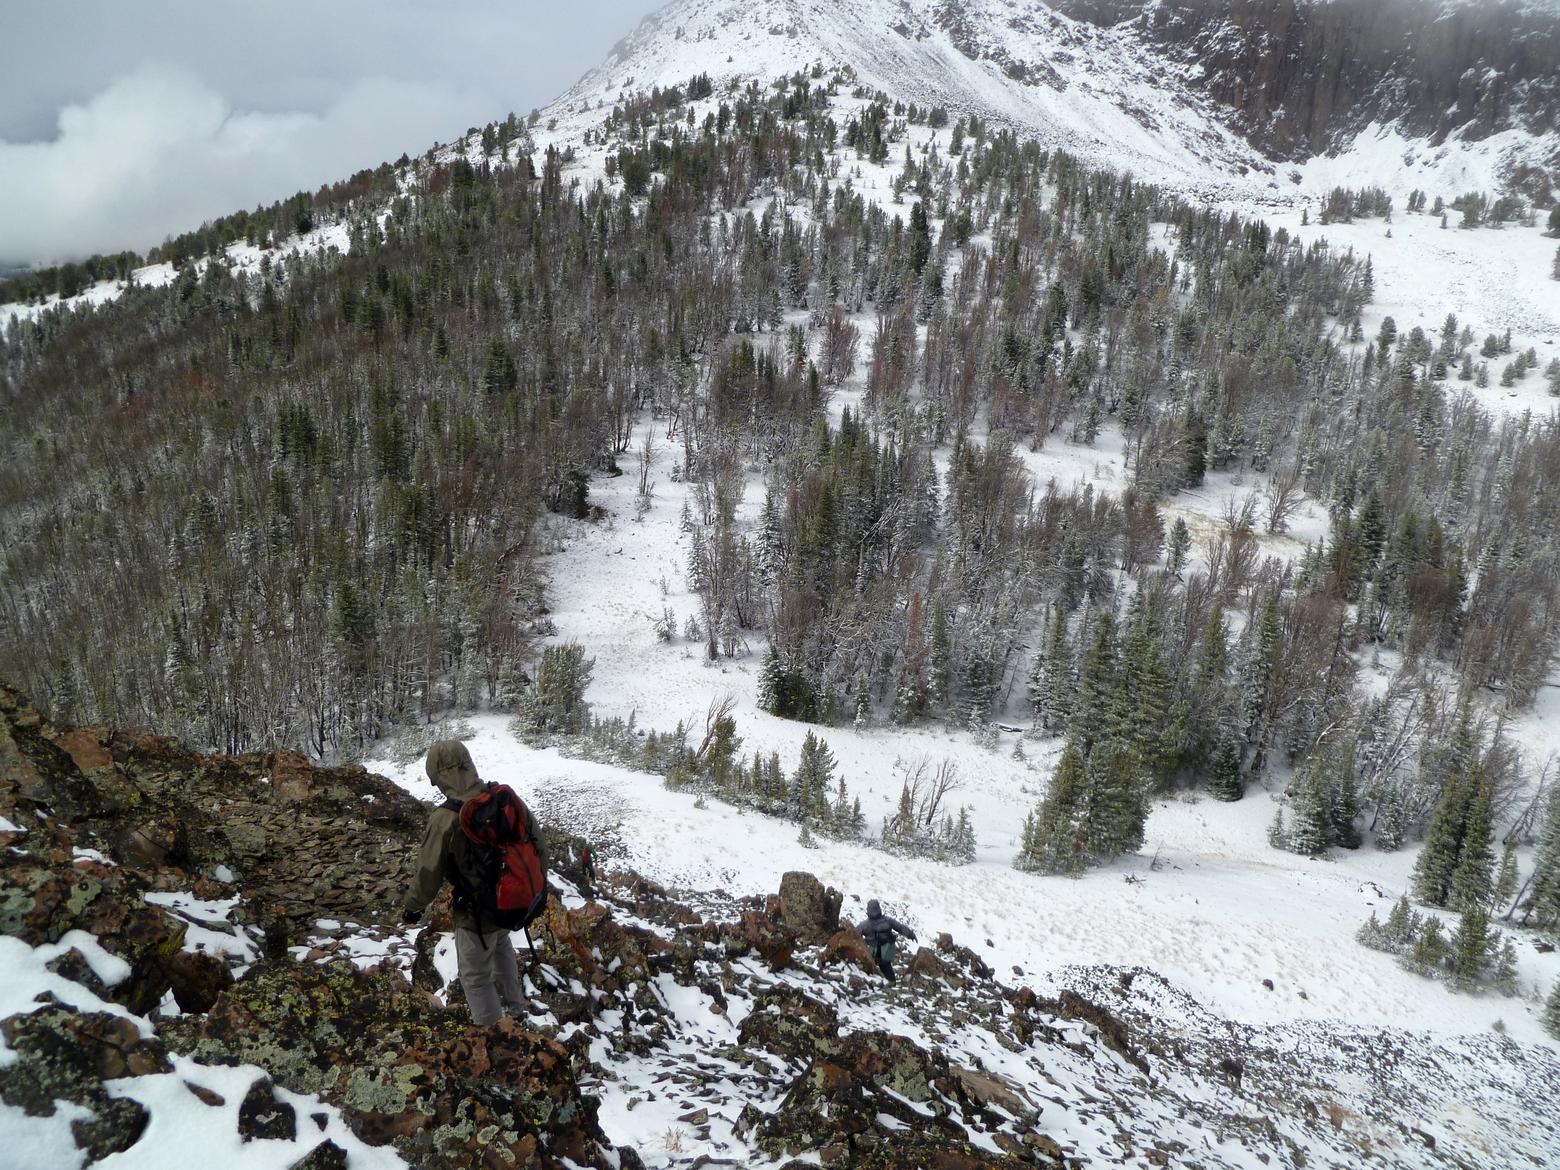 Former Forest Service Climate Change researcher Jesse Logan clambers down scree to get to whitebark pine stands along Packsaddle Peak in the Tom Miner Basin. Photo by Laura Lundquist